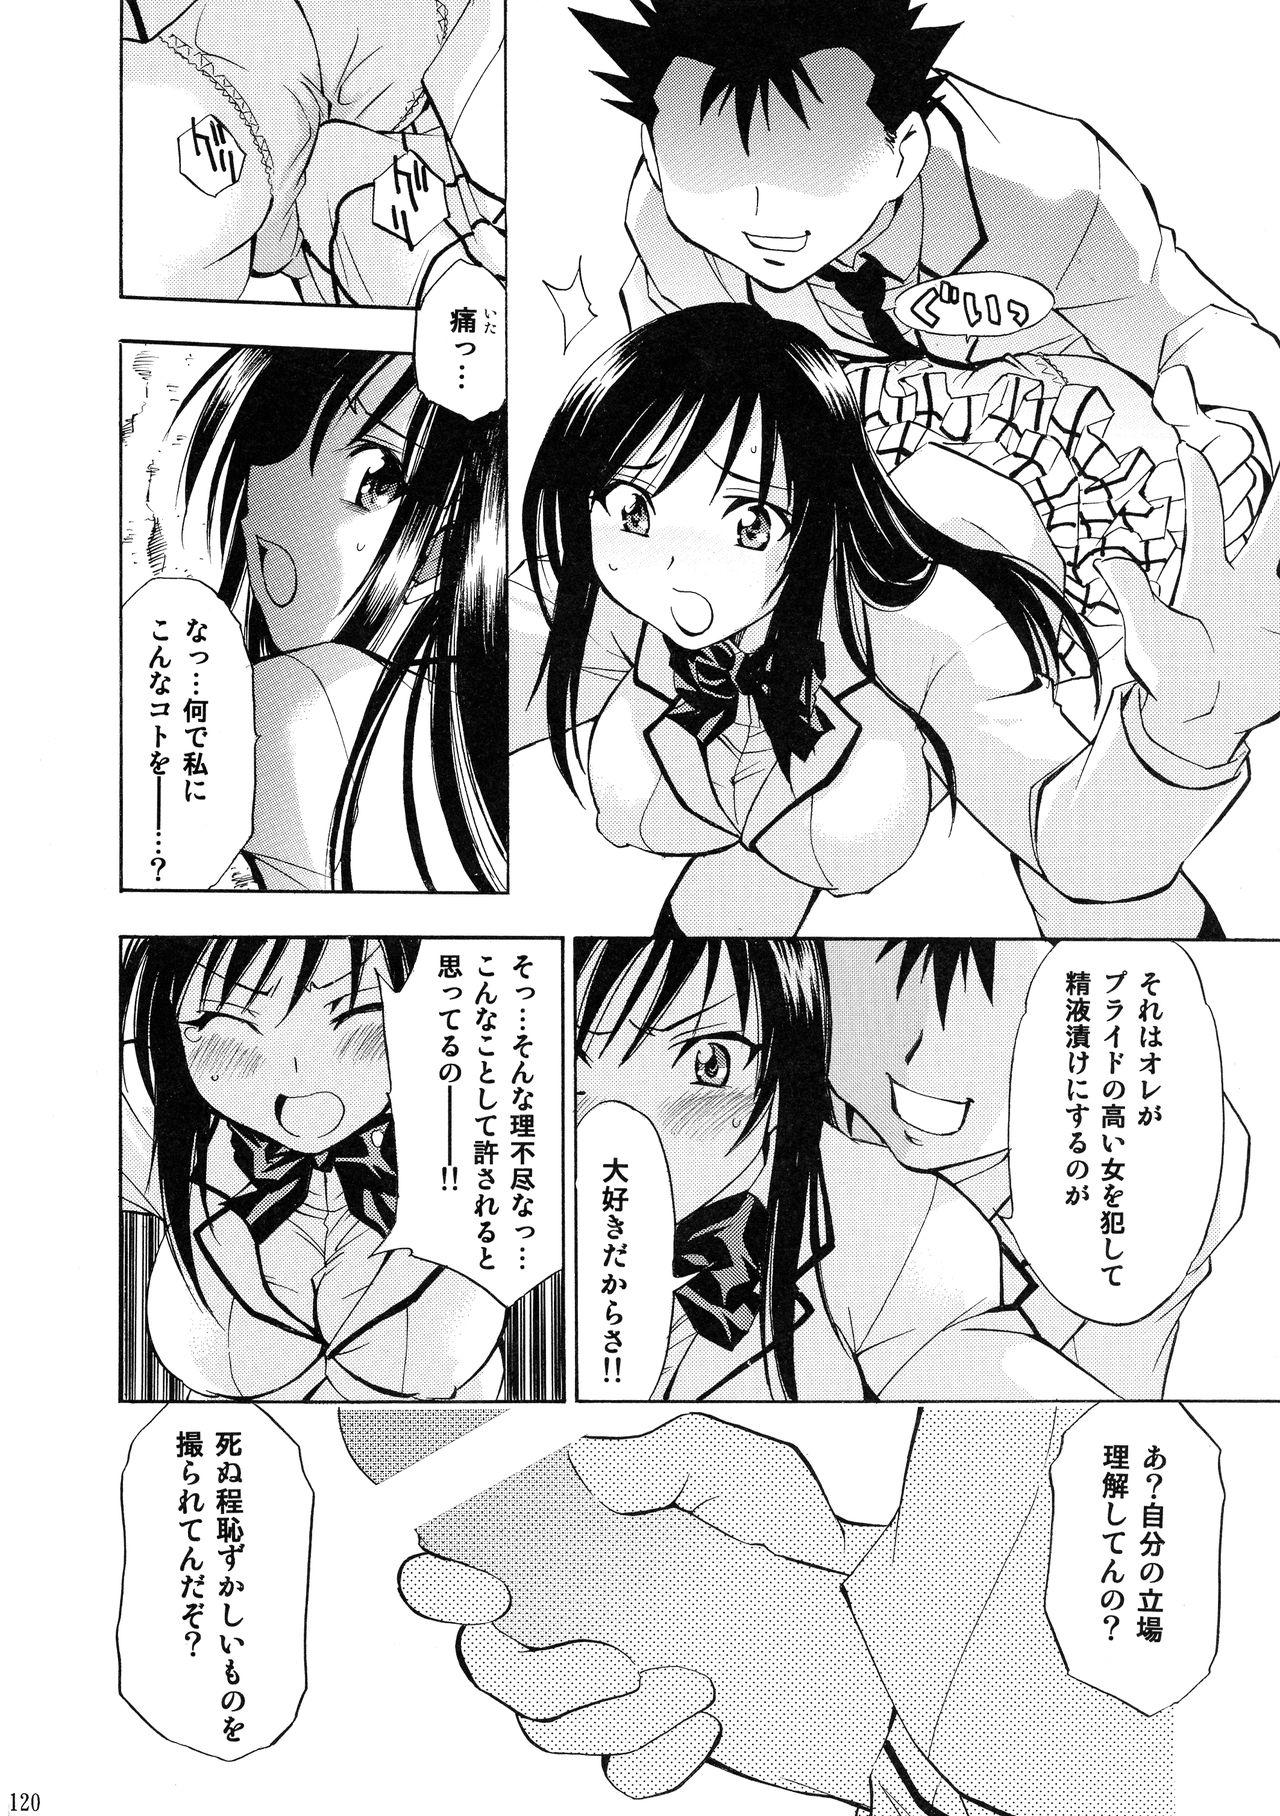 Trouble Musume 118